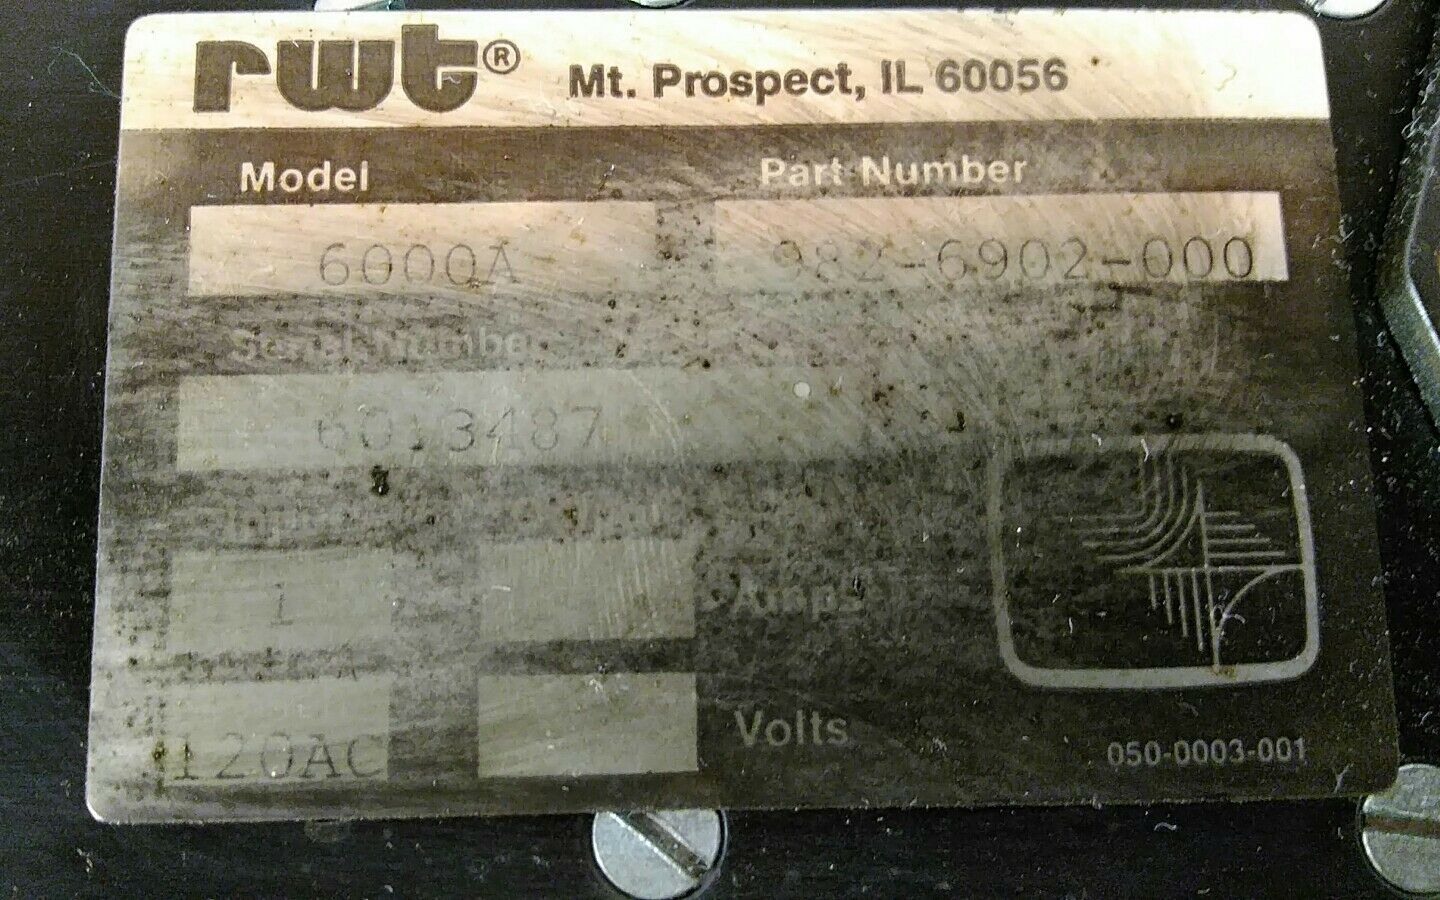 R W T Corp Model 6000A P/N 982-6902-000 Computer.     3A